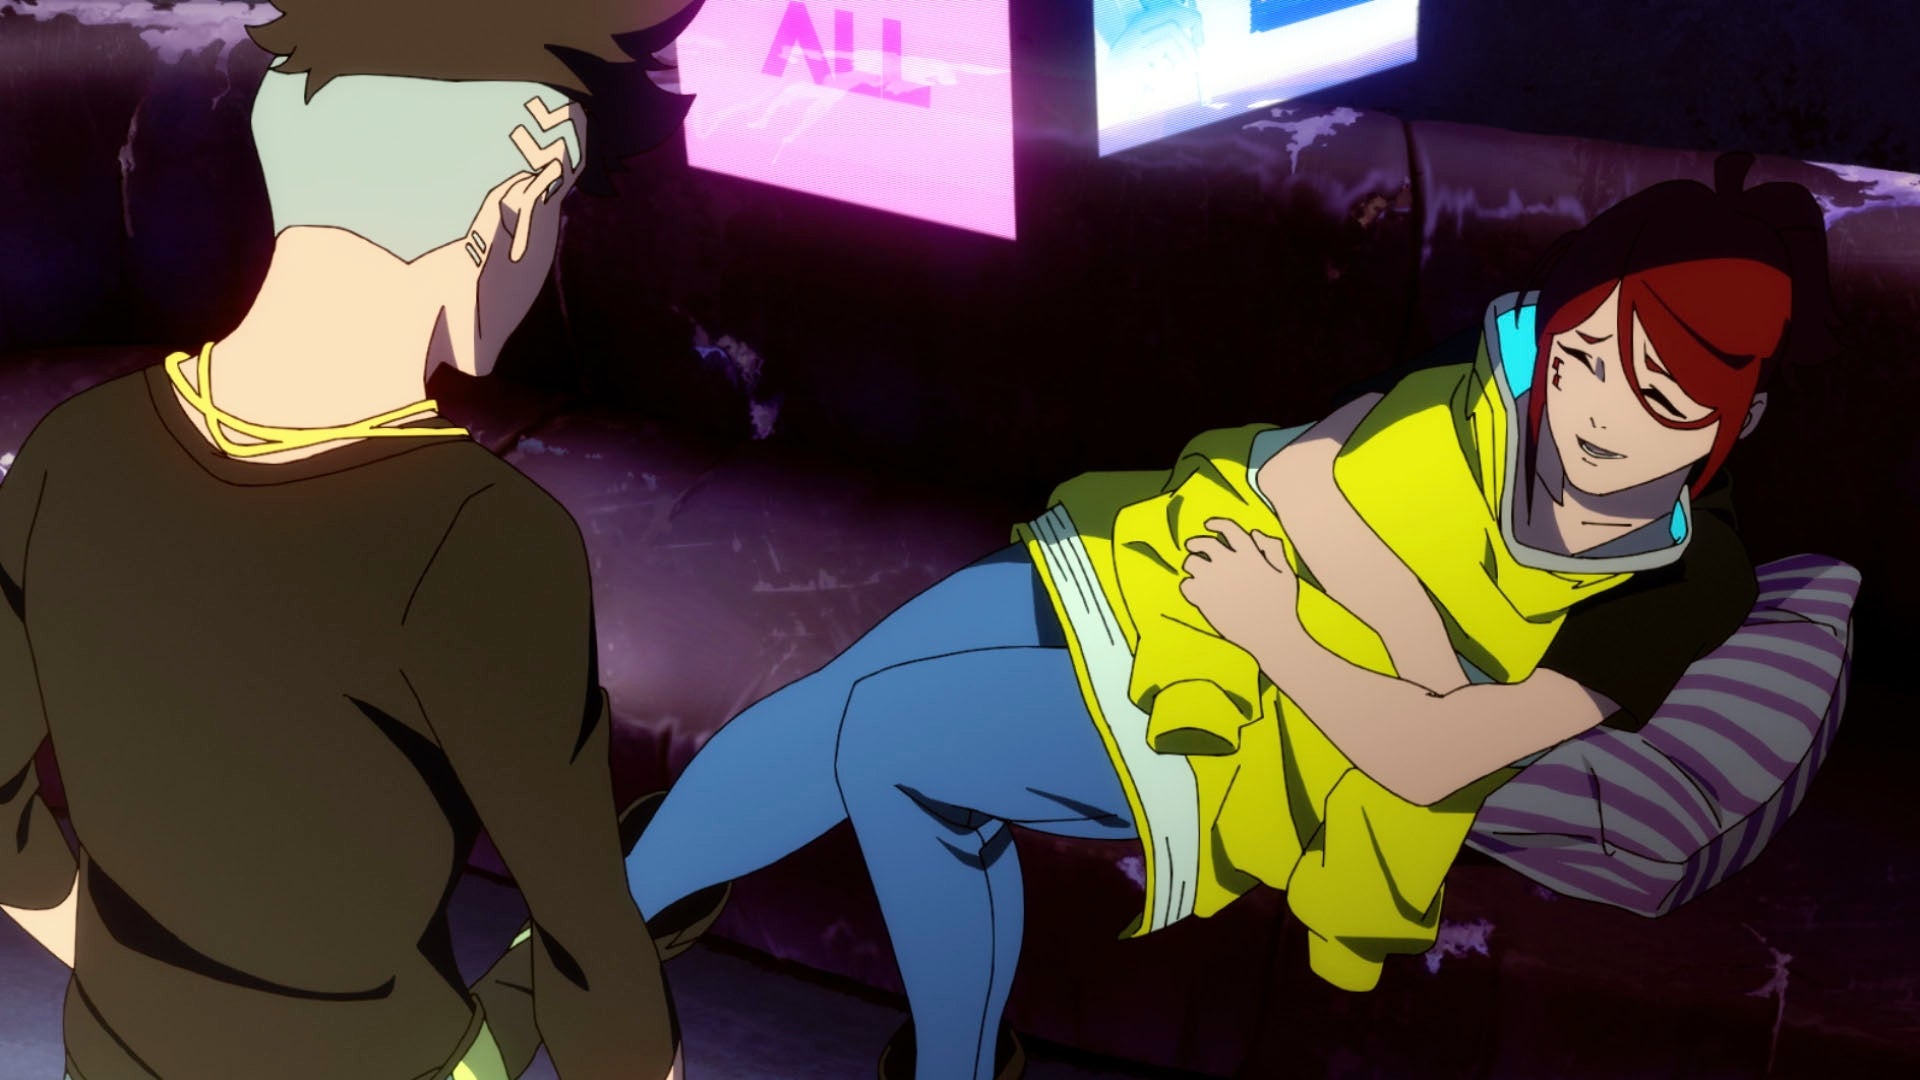 Watch the first trailer for the Cyberpunk: Edgerunners anime - The Verge